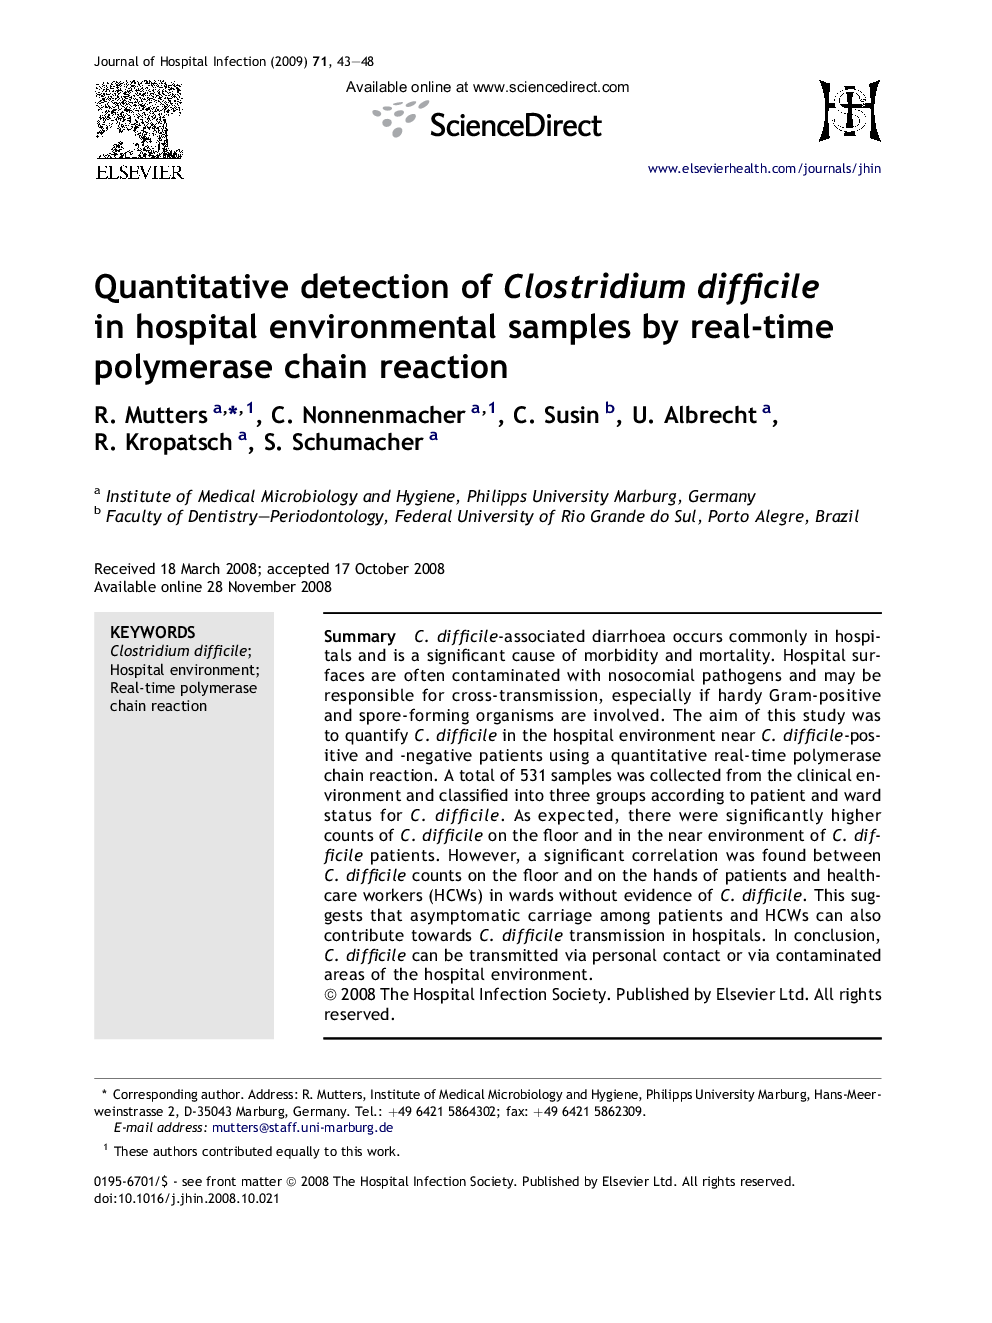 Quantitative detection of Clostridium difficile in hospital environmental samples by real-time polymerase chain reaction